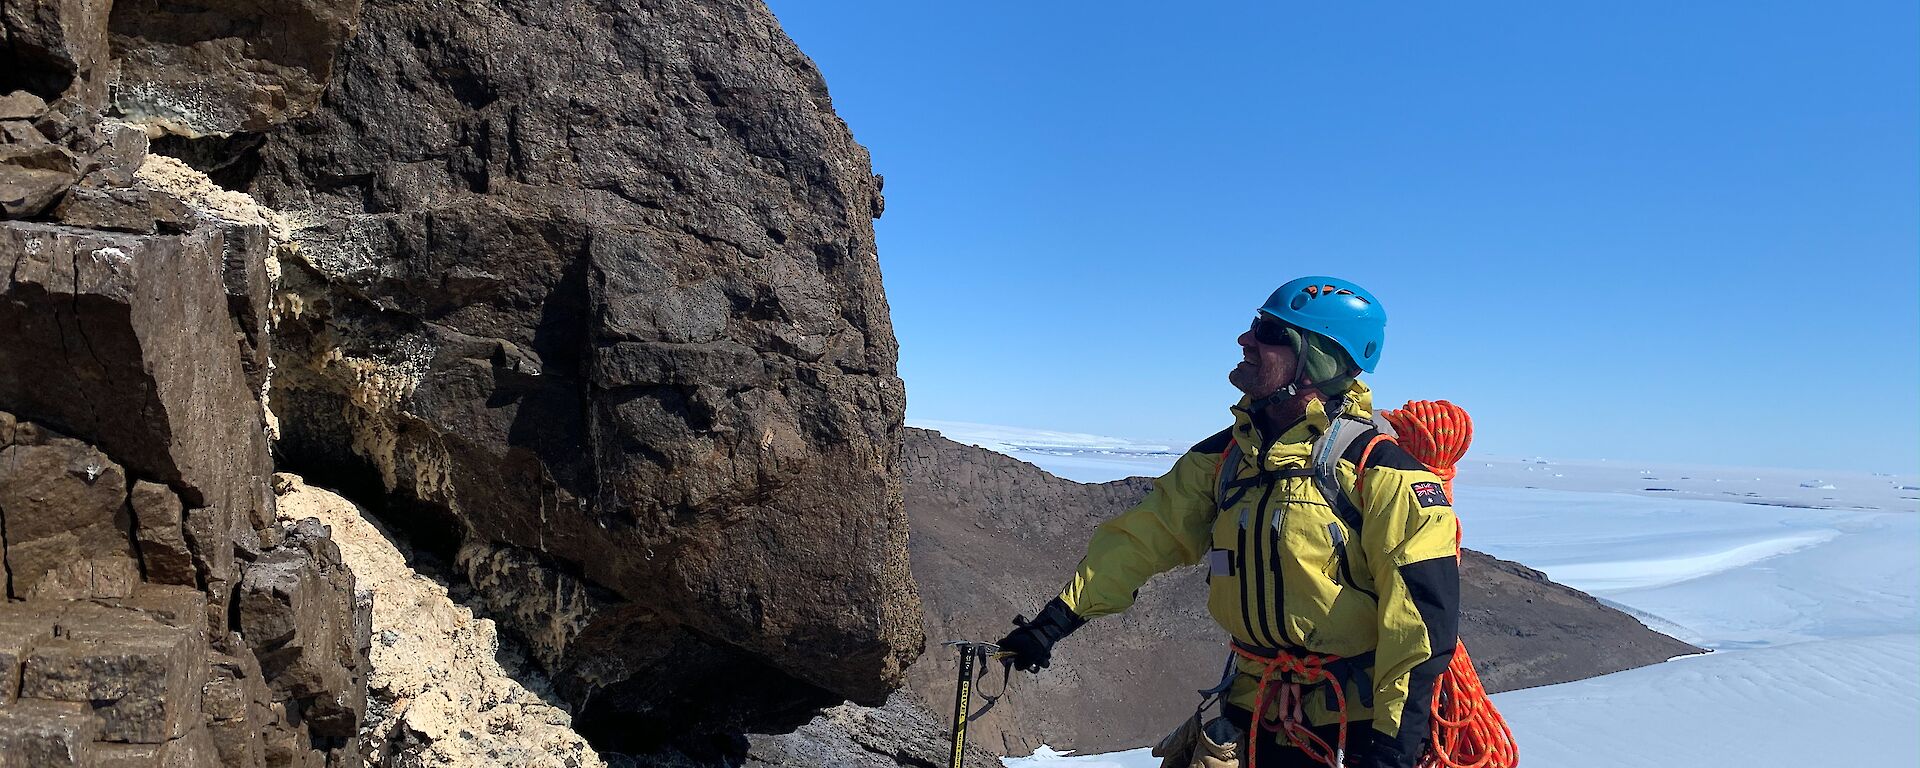 An climber with ropes and helmet stands atop a mountain looking at a mumiyo deposit.  Snow can be seen on the ground below.